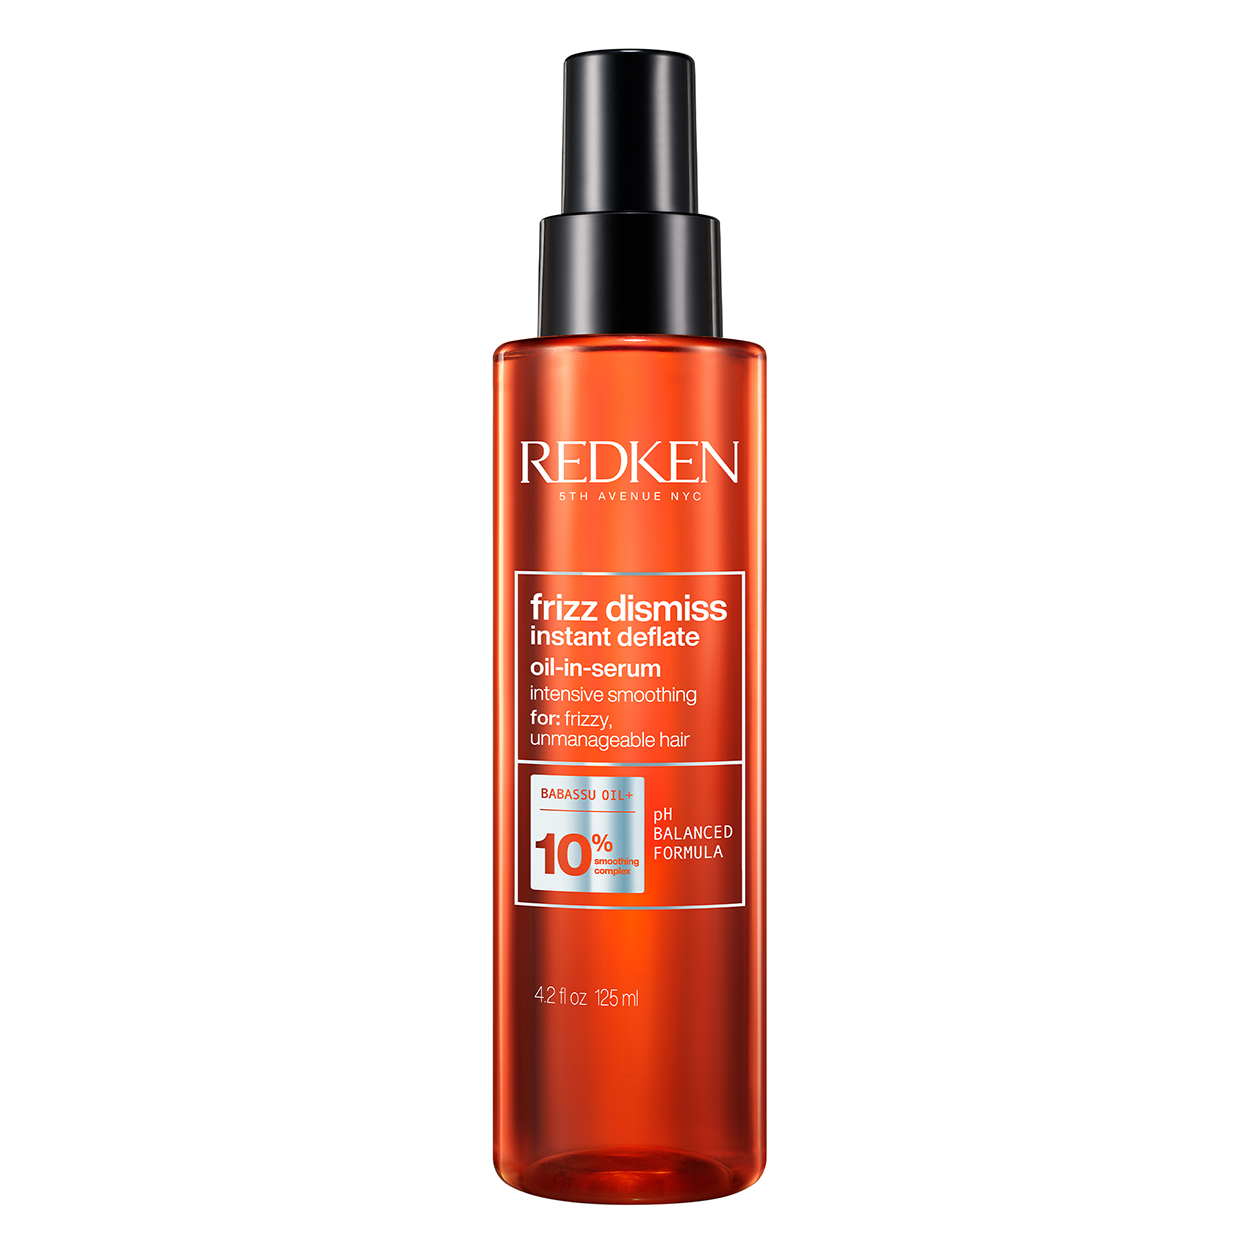 Redken Frizz Dismiss Instant Deflate Oil-In-Serum | For Frizzy Hair | Enhances Smoothness & Shine | With Babassu Oil | Sulfate Free 4.2 Fl Oz